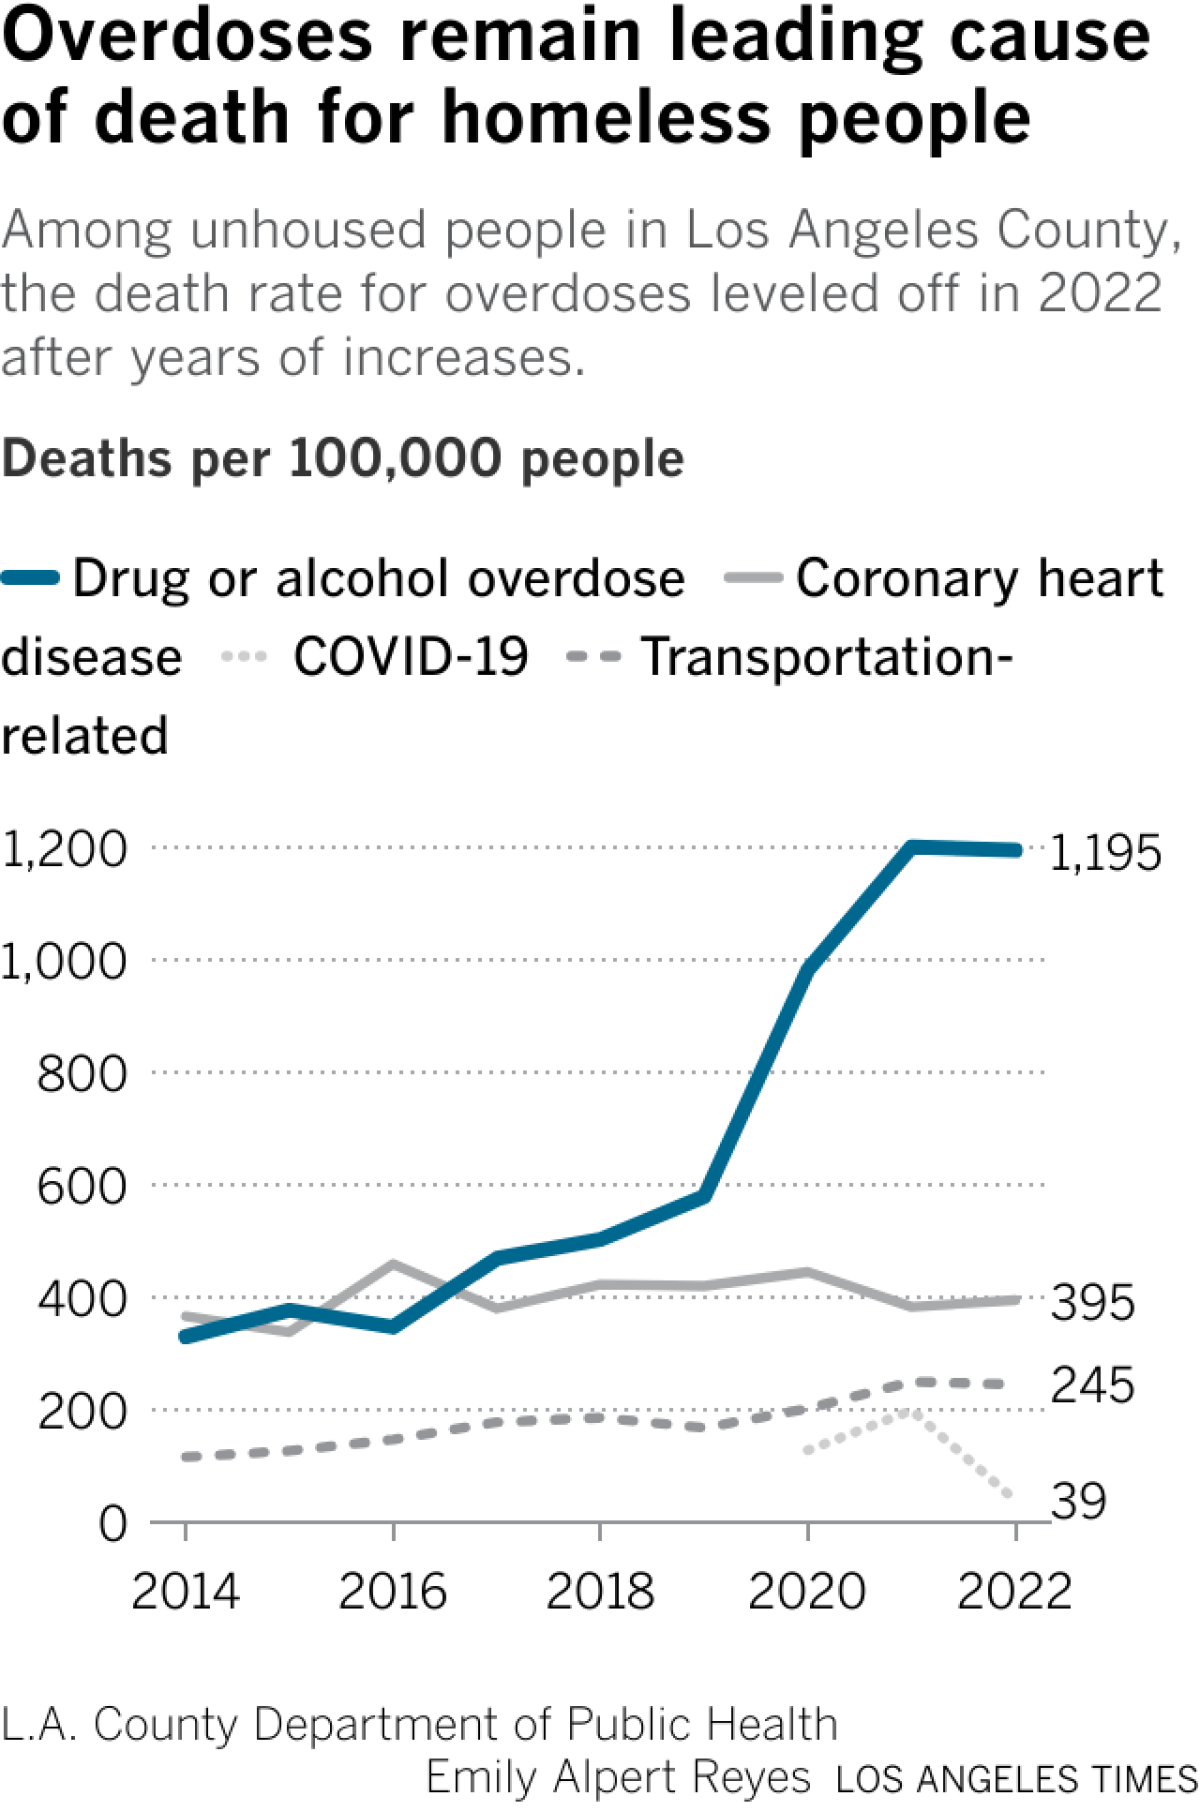 Line chart shows four lines that represent the mortality rate per 100,000 homeless people in Los Angeles County for deaths related to drug or alcohol overdose, coronary disease, transportation-related and COVID-19. Among unhoused people in the county, the death rate for overdoses leveled off in 2022 after years of increases.